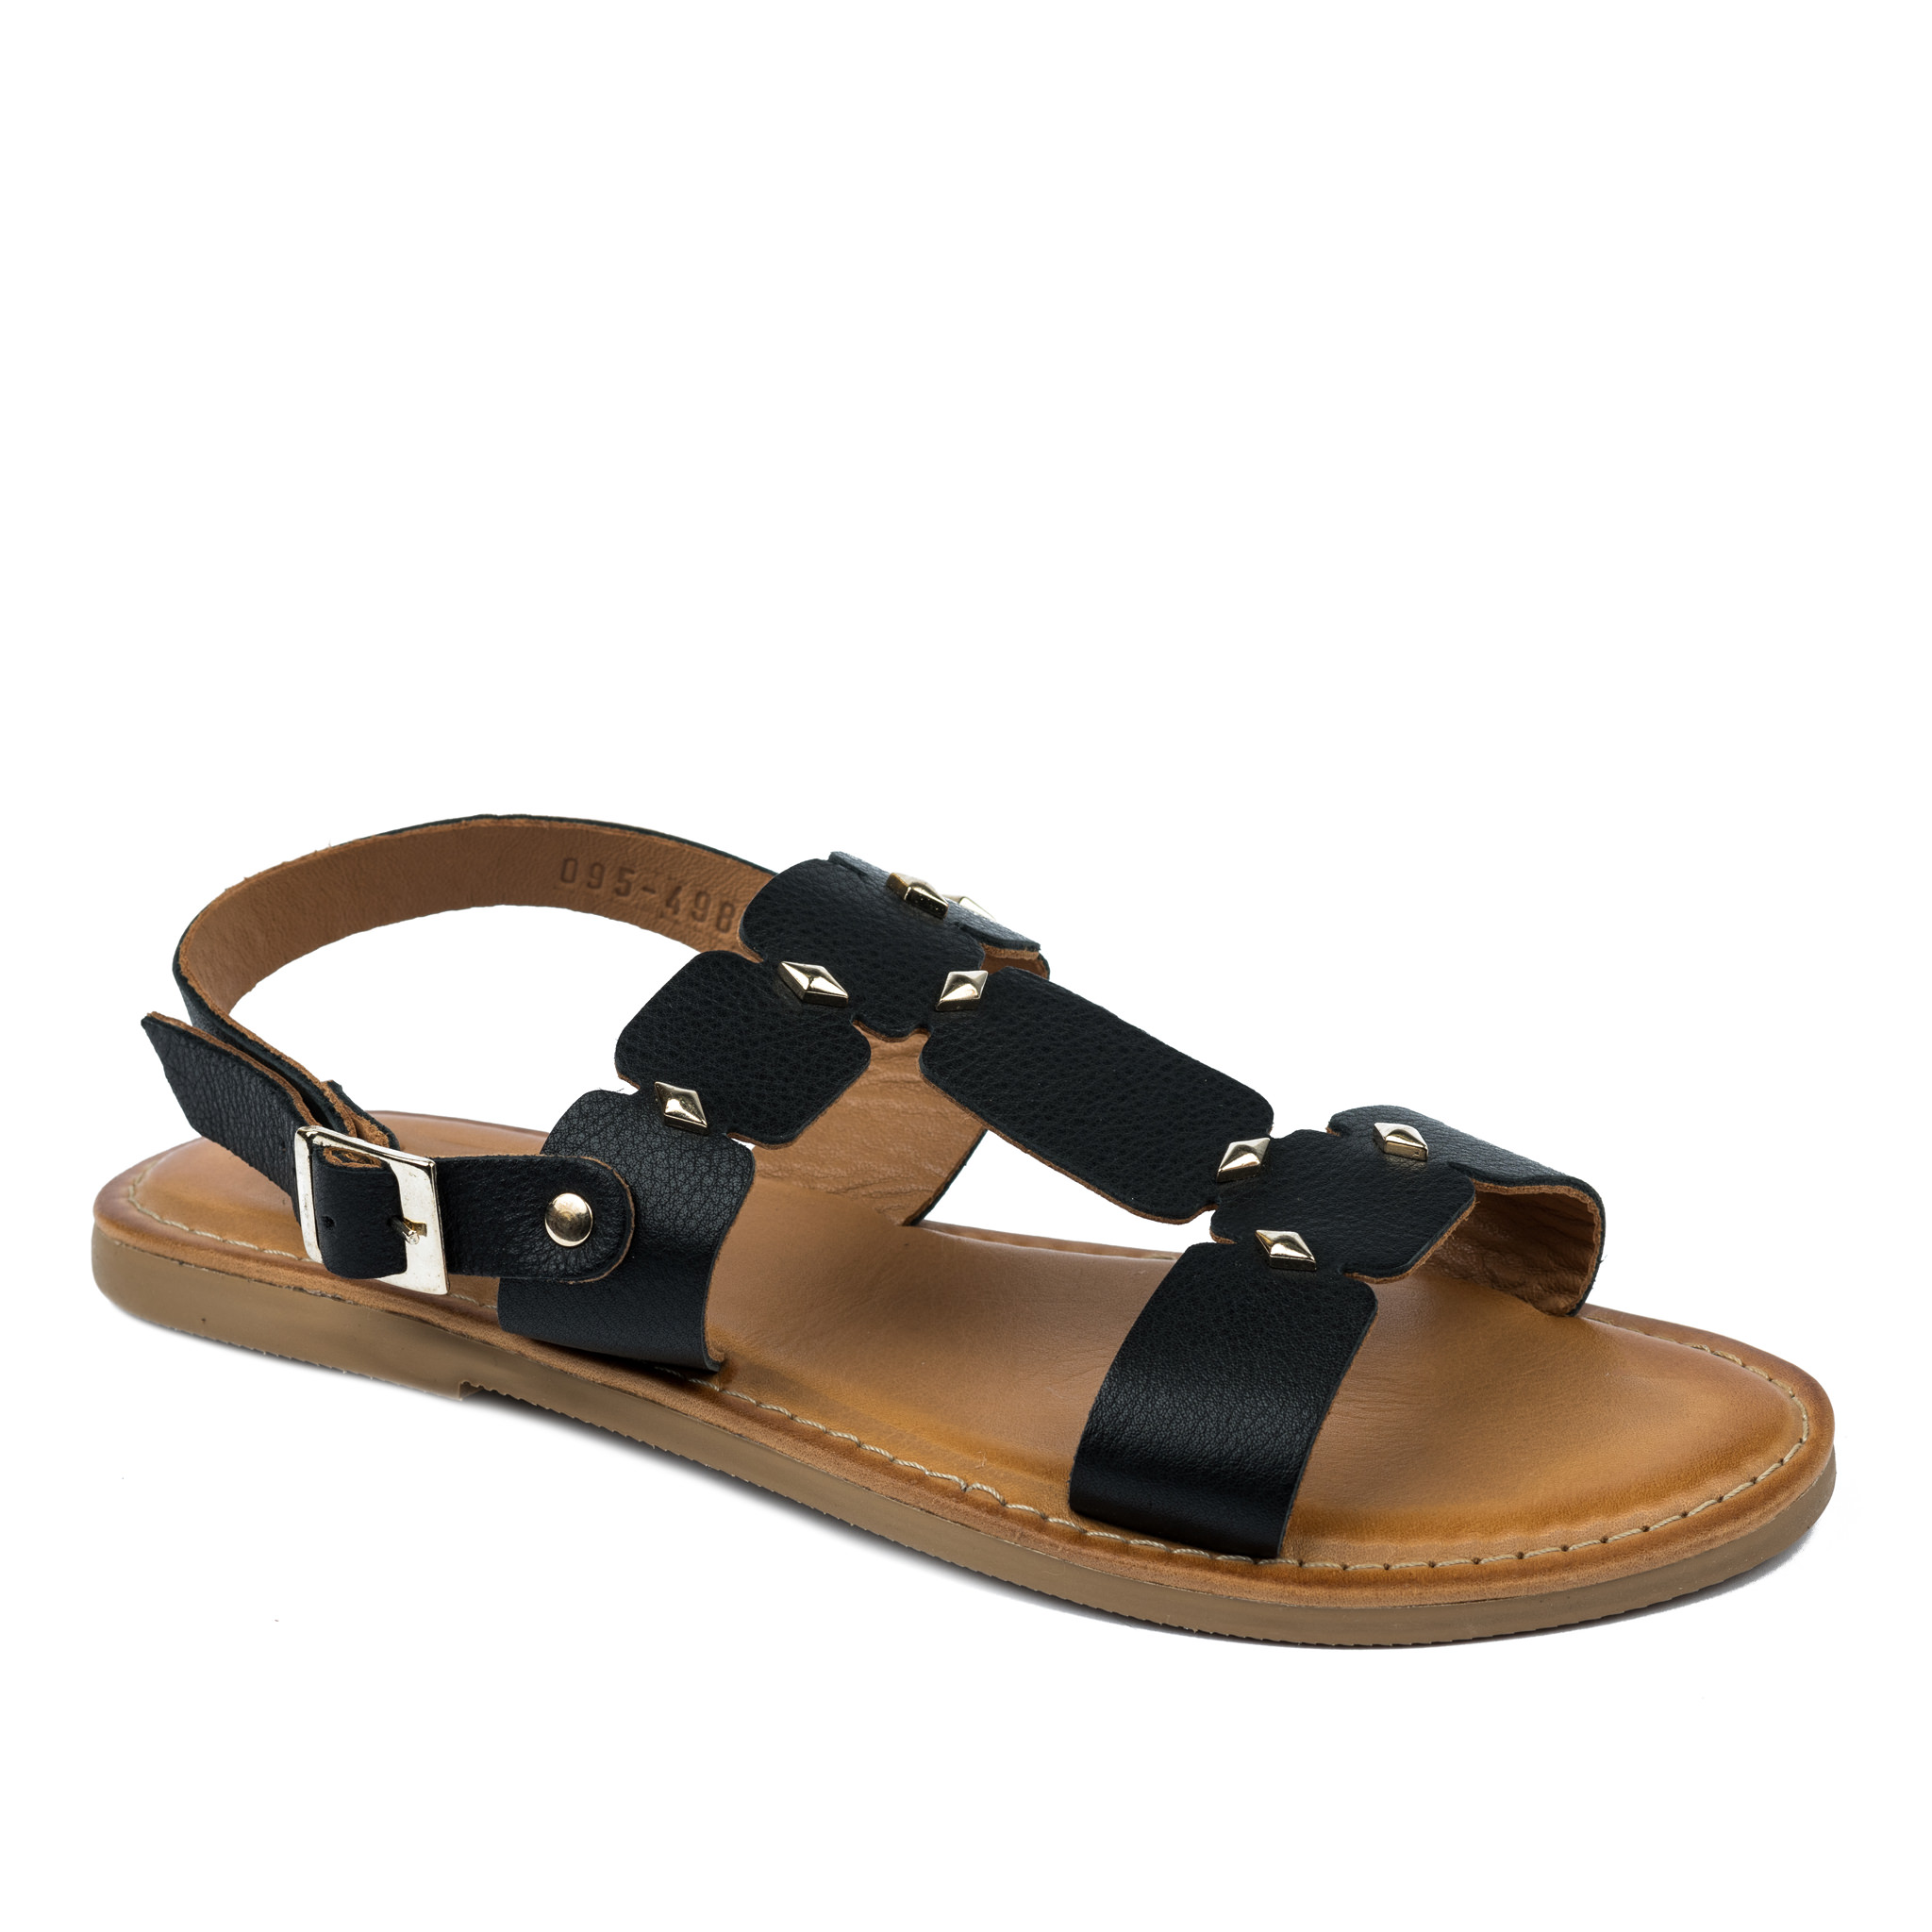 Leather sandals A685 - BLACK